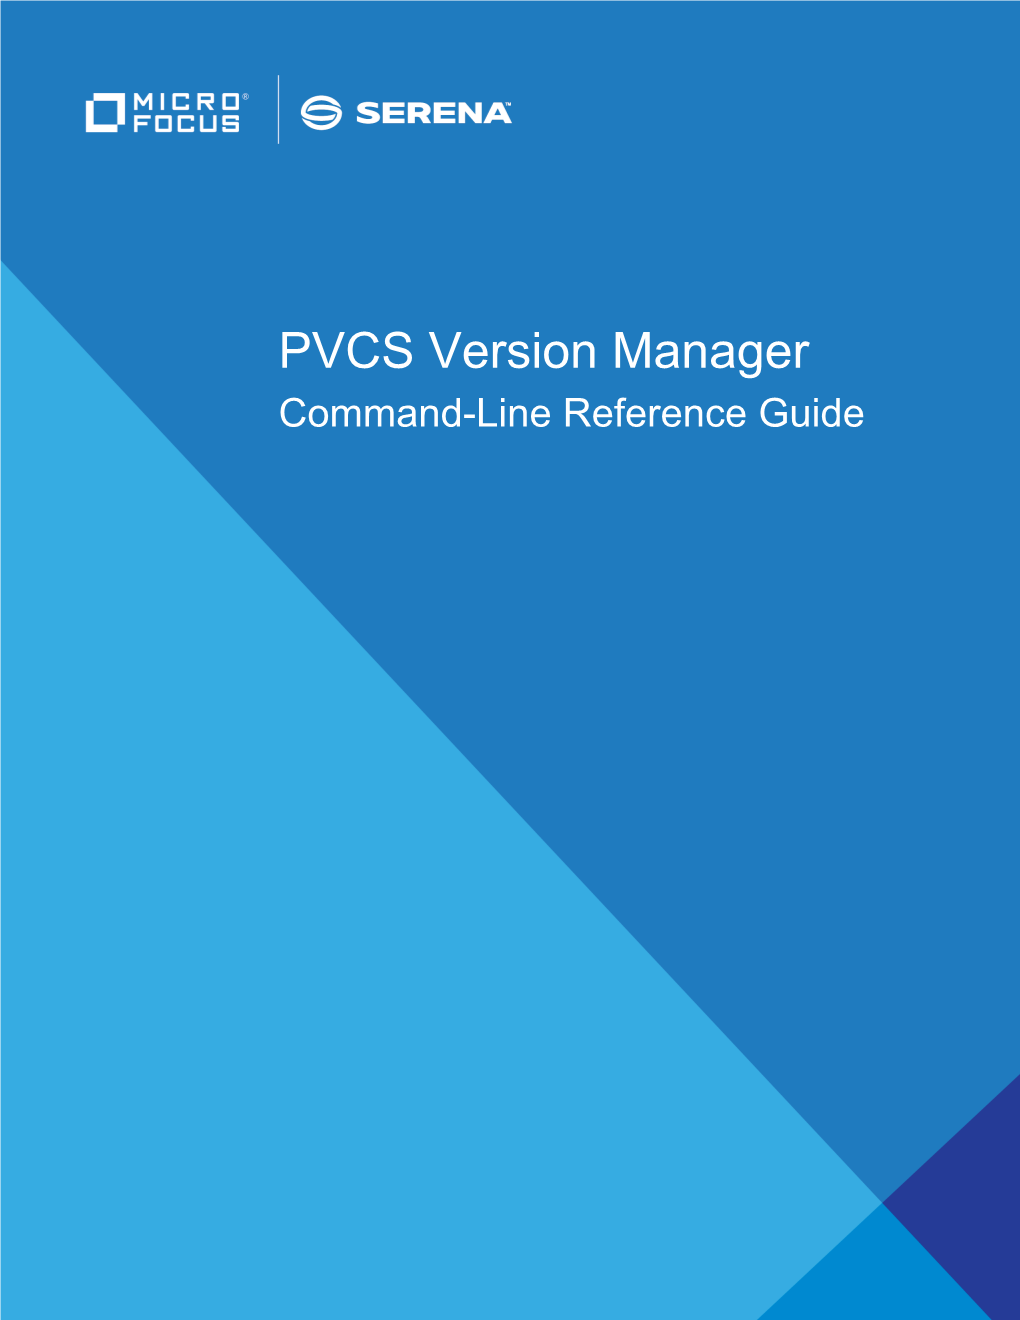 PVCS Version Manager Command-Line Reference Guide Copyright © 2018 Serena Software, Inc., a Micro Focus Company